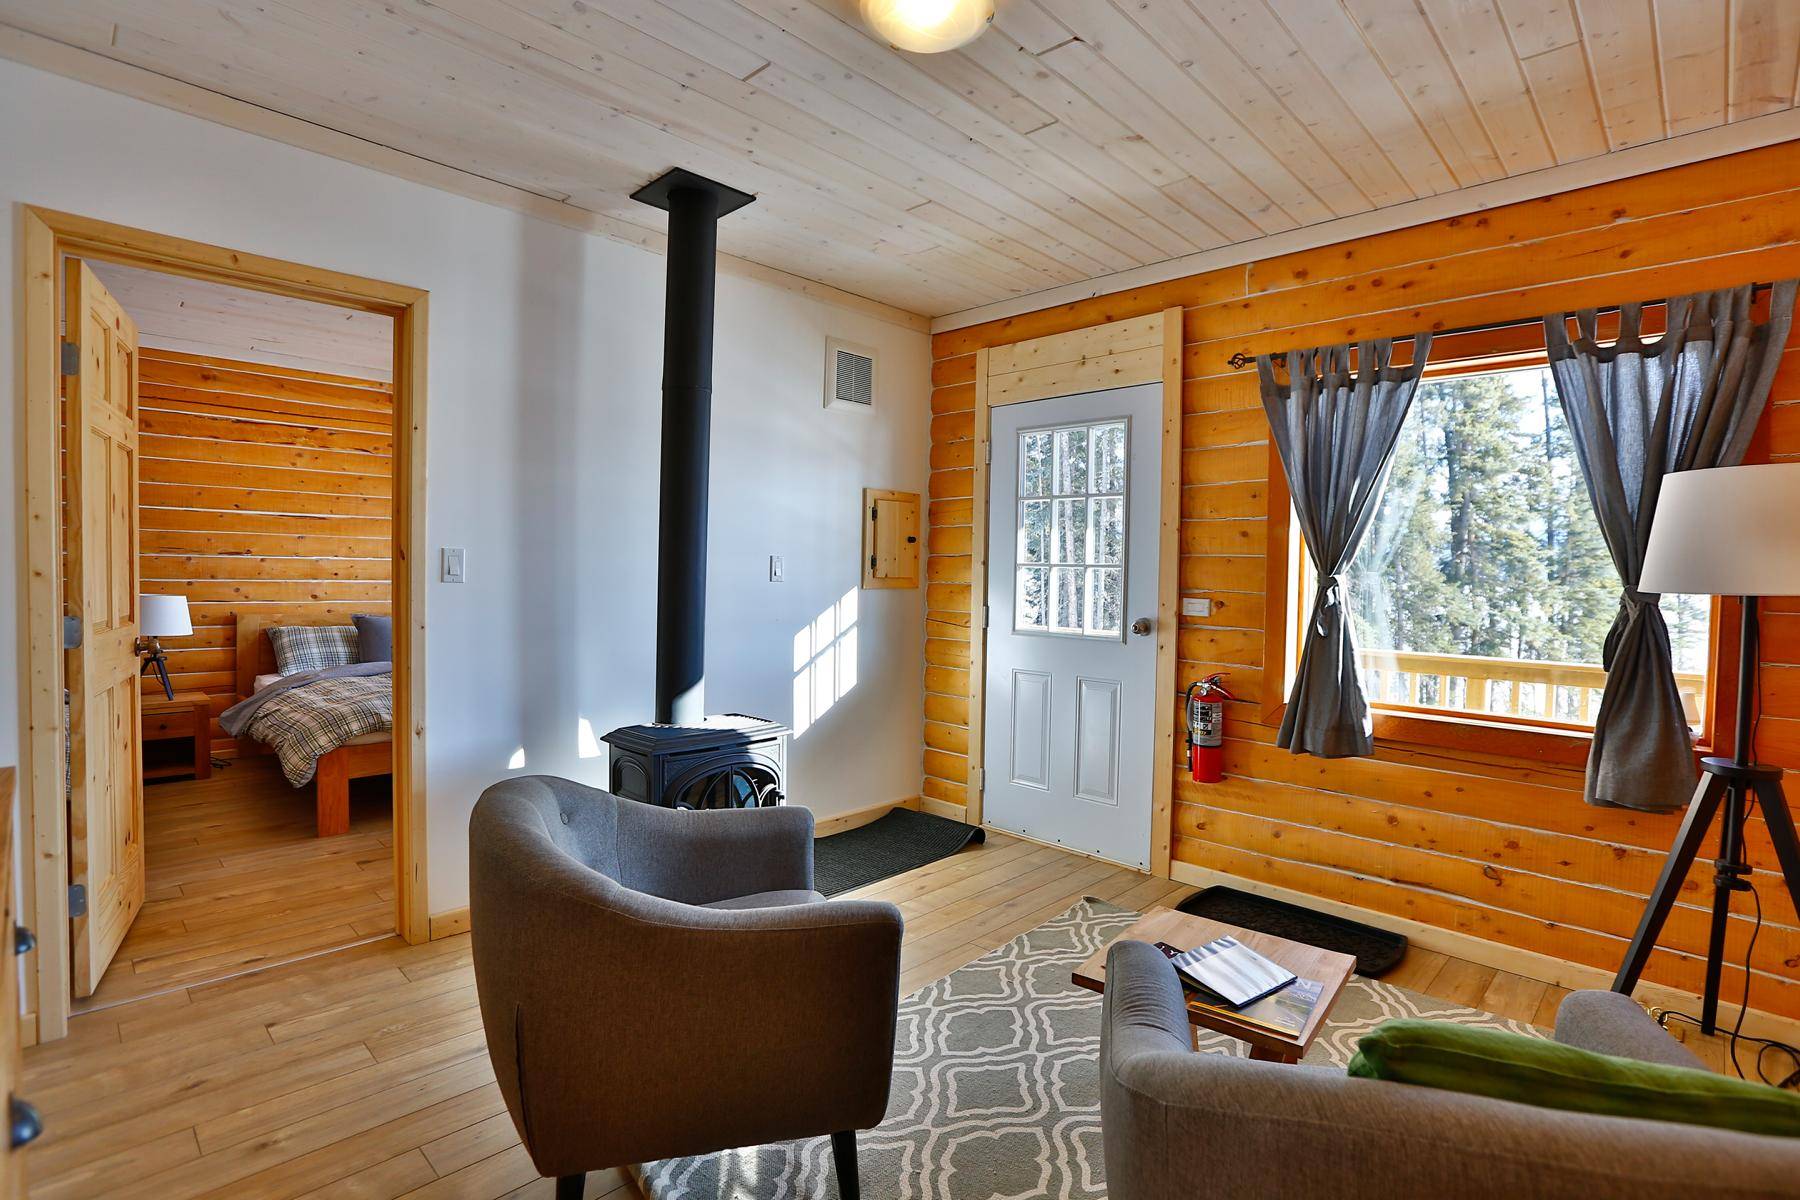 livingroom of a cabin with stove and cozy chairs, bedroom in back